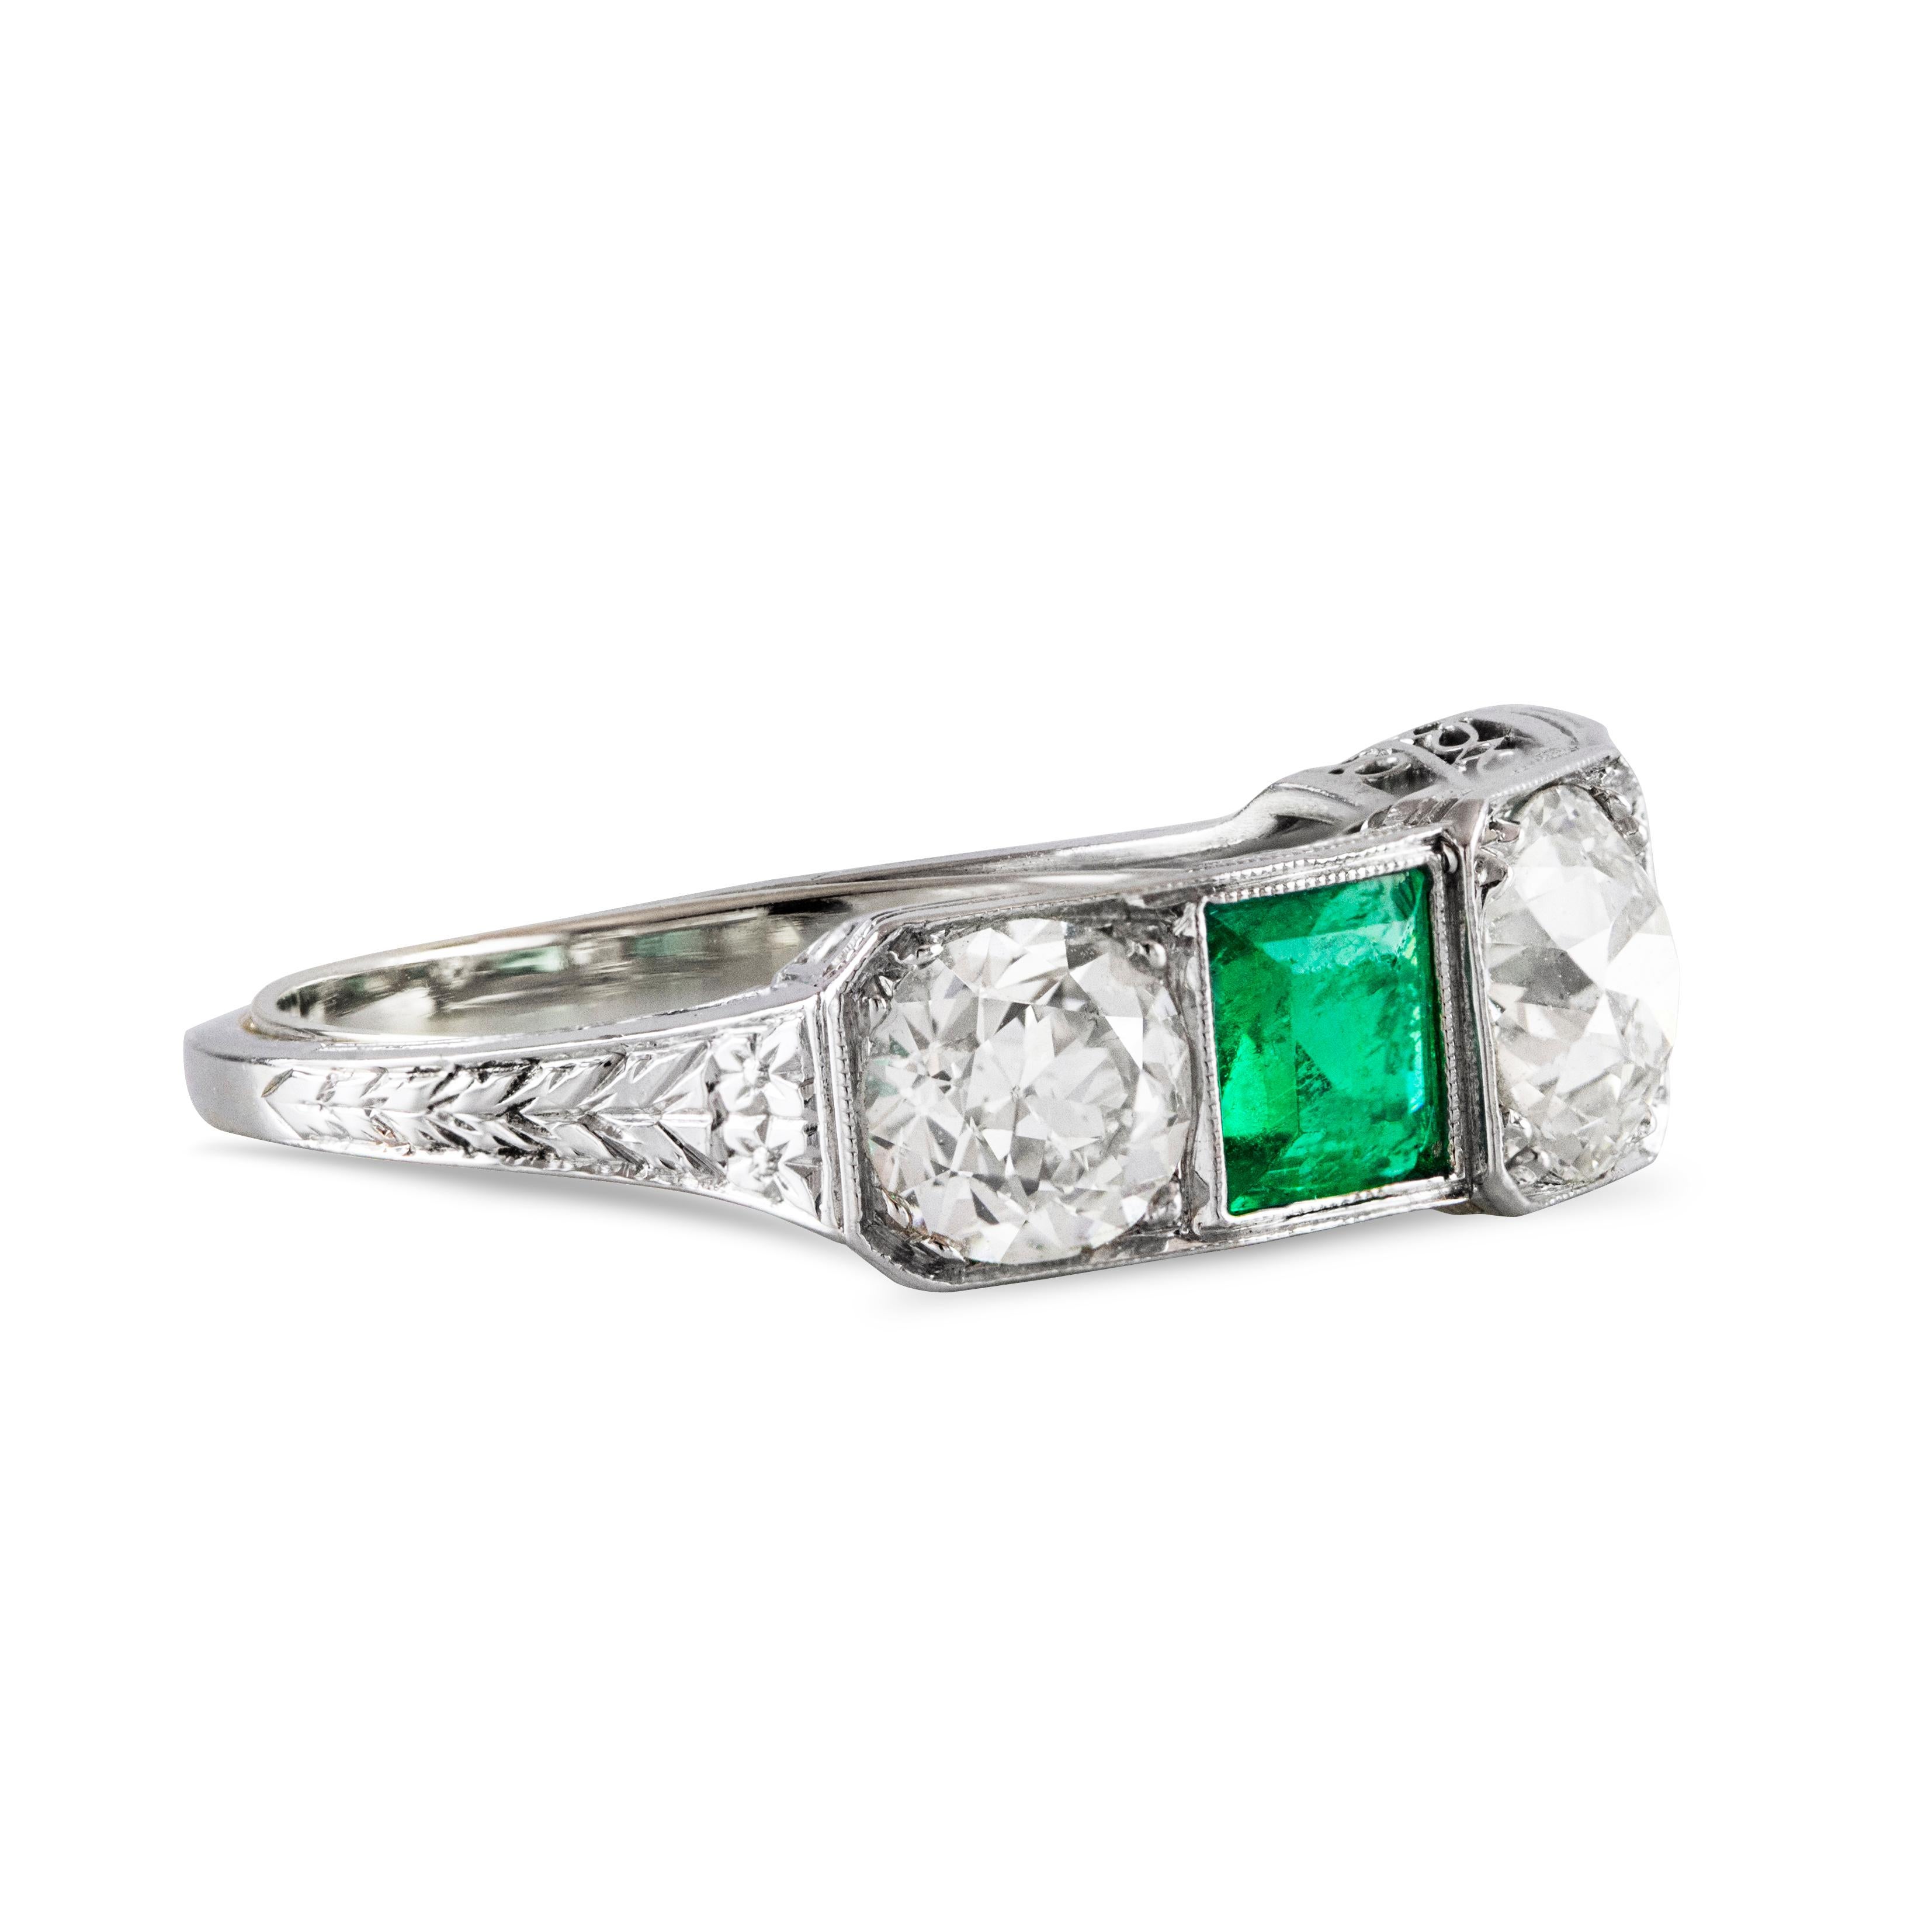 This gorgeous vintage ring features three Old European cut diamonds weighing 2.15 carat total, elegantly alternates with square cut green emerald in between weighing 0.97 carats total. Made in Platinum with beaded edges. 